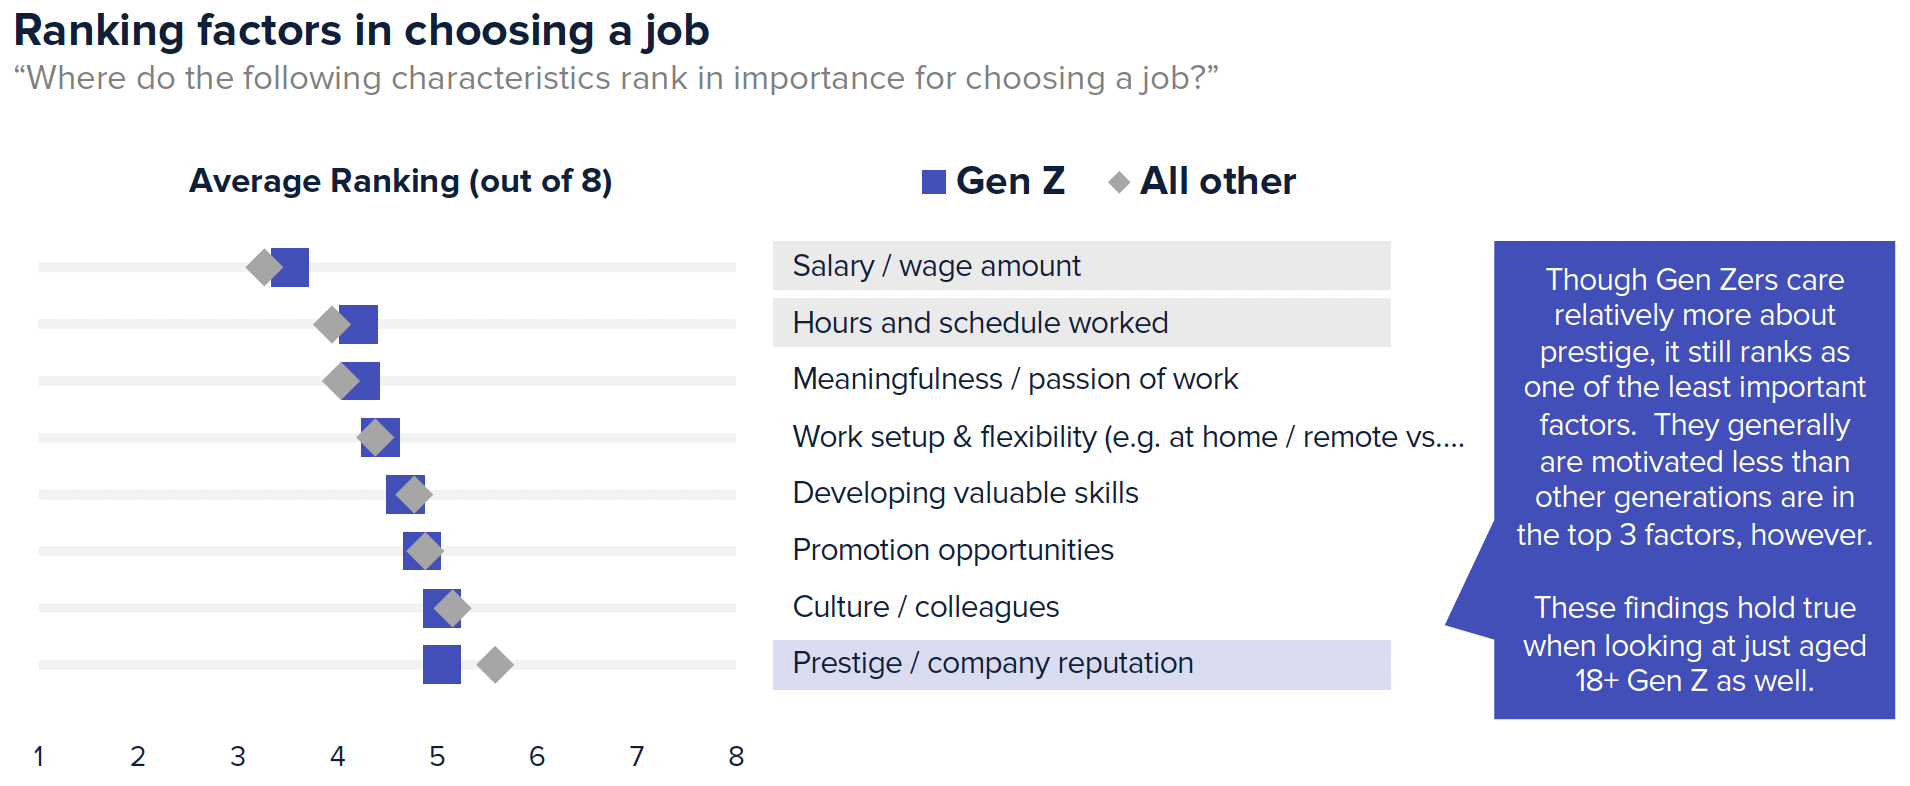 Gen Z, like other generations, cares most about salary / wage, followed by hours and schedule worked.